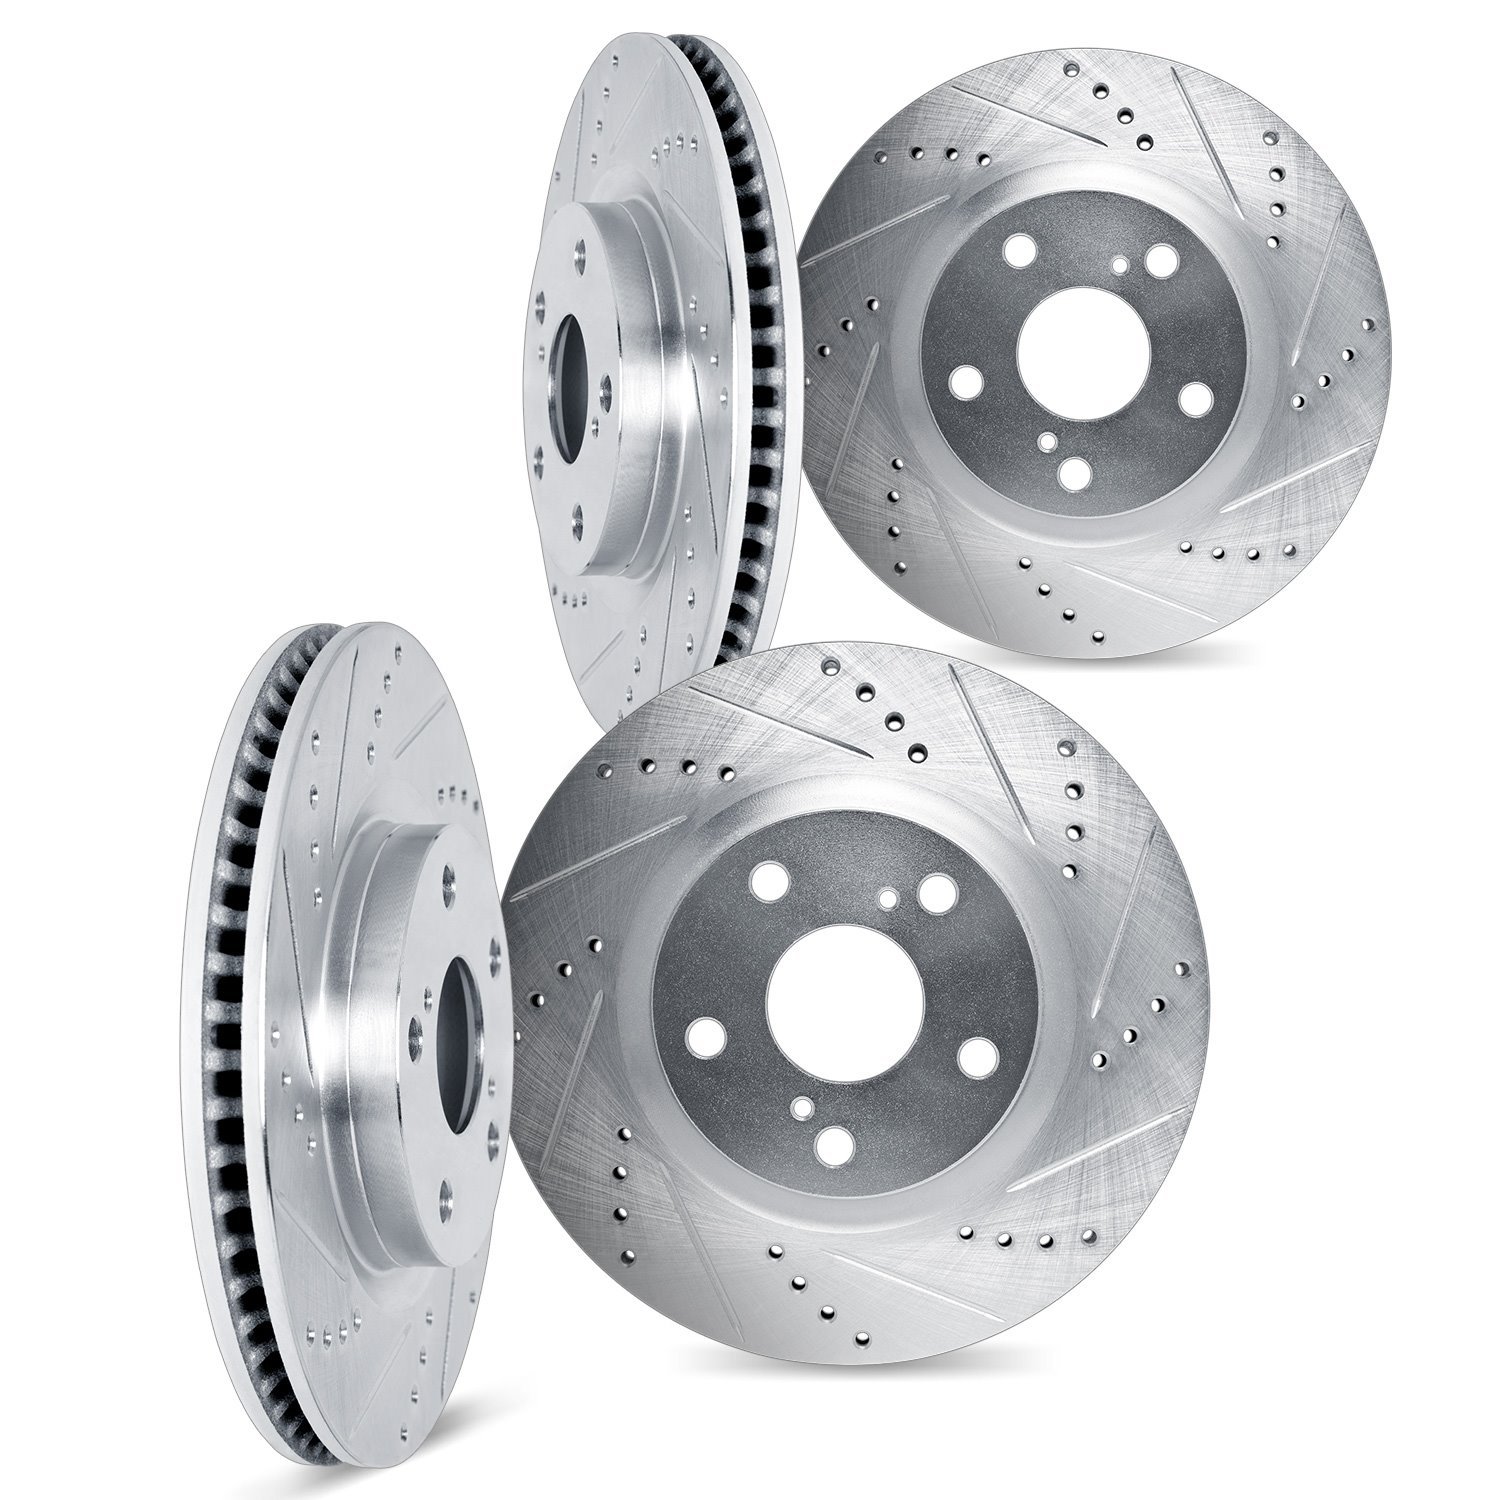 7004-67109 Drilled/Slotted Brake Rotors [Silver], Fits Select Infiniti/Nissan, Position: Front and Rear